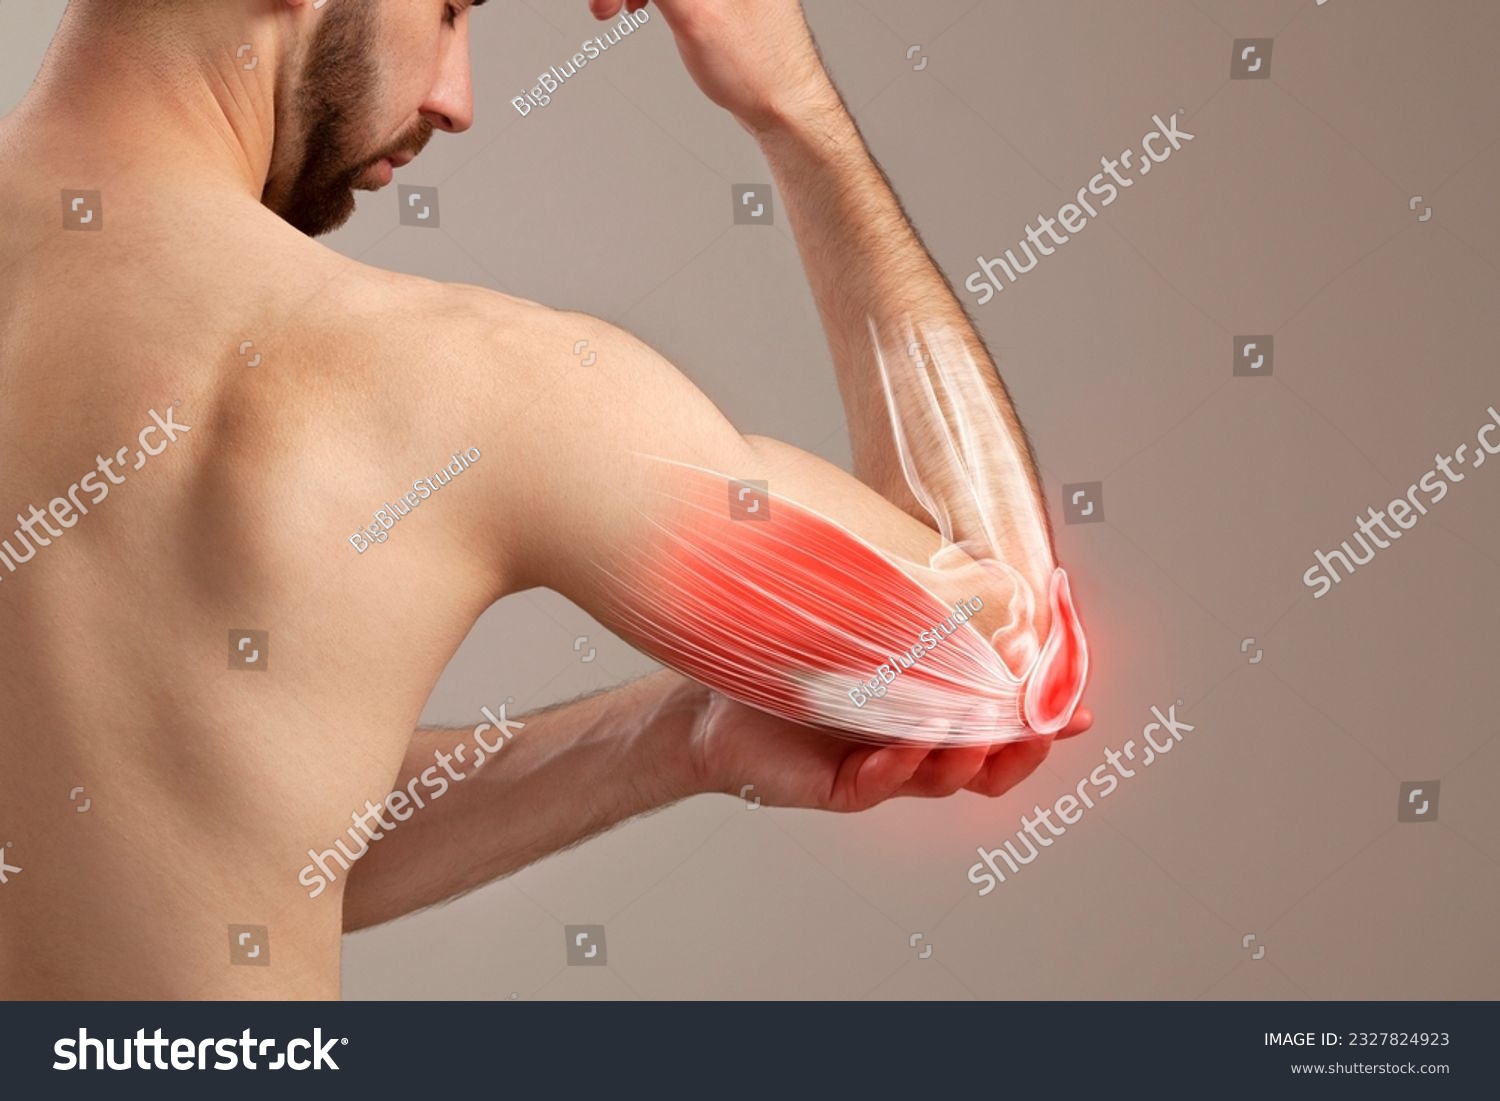 A Man's Grip on His Painful Elbow, human arm pain #2327824923